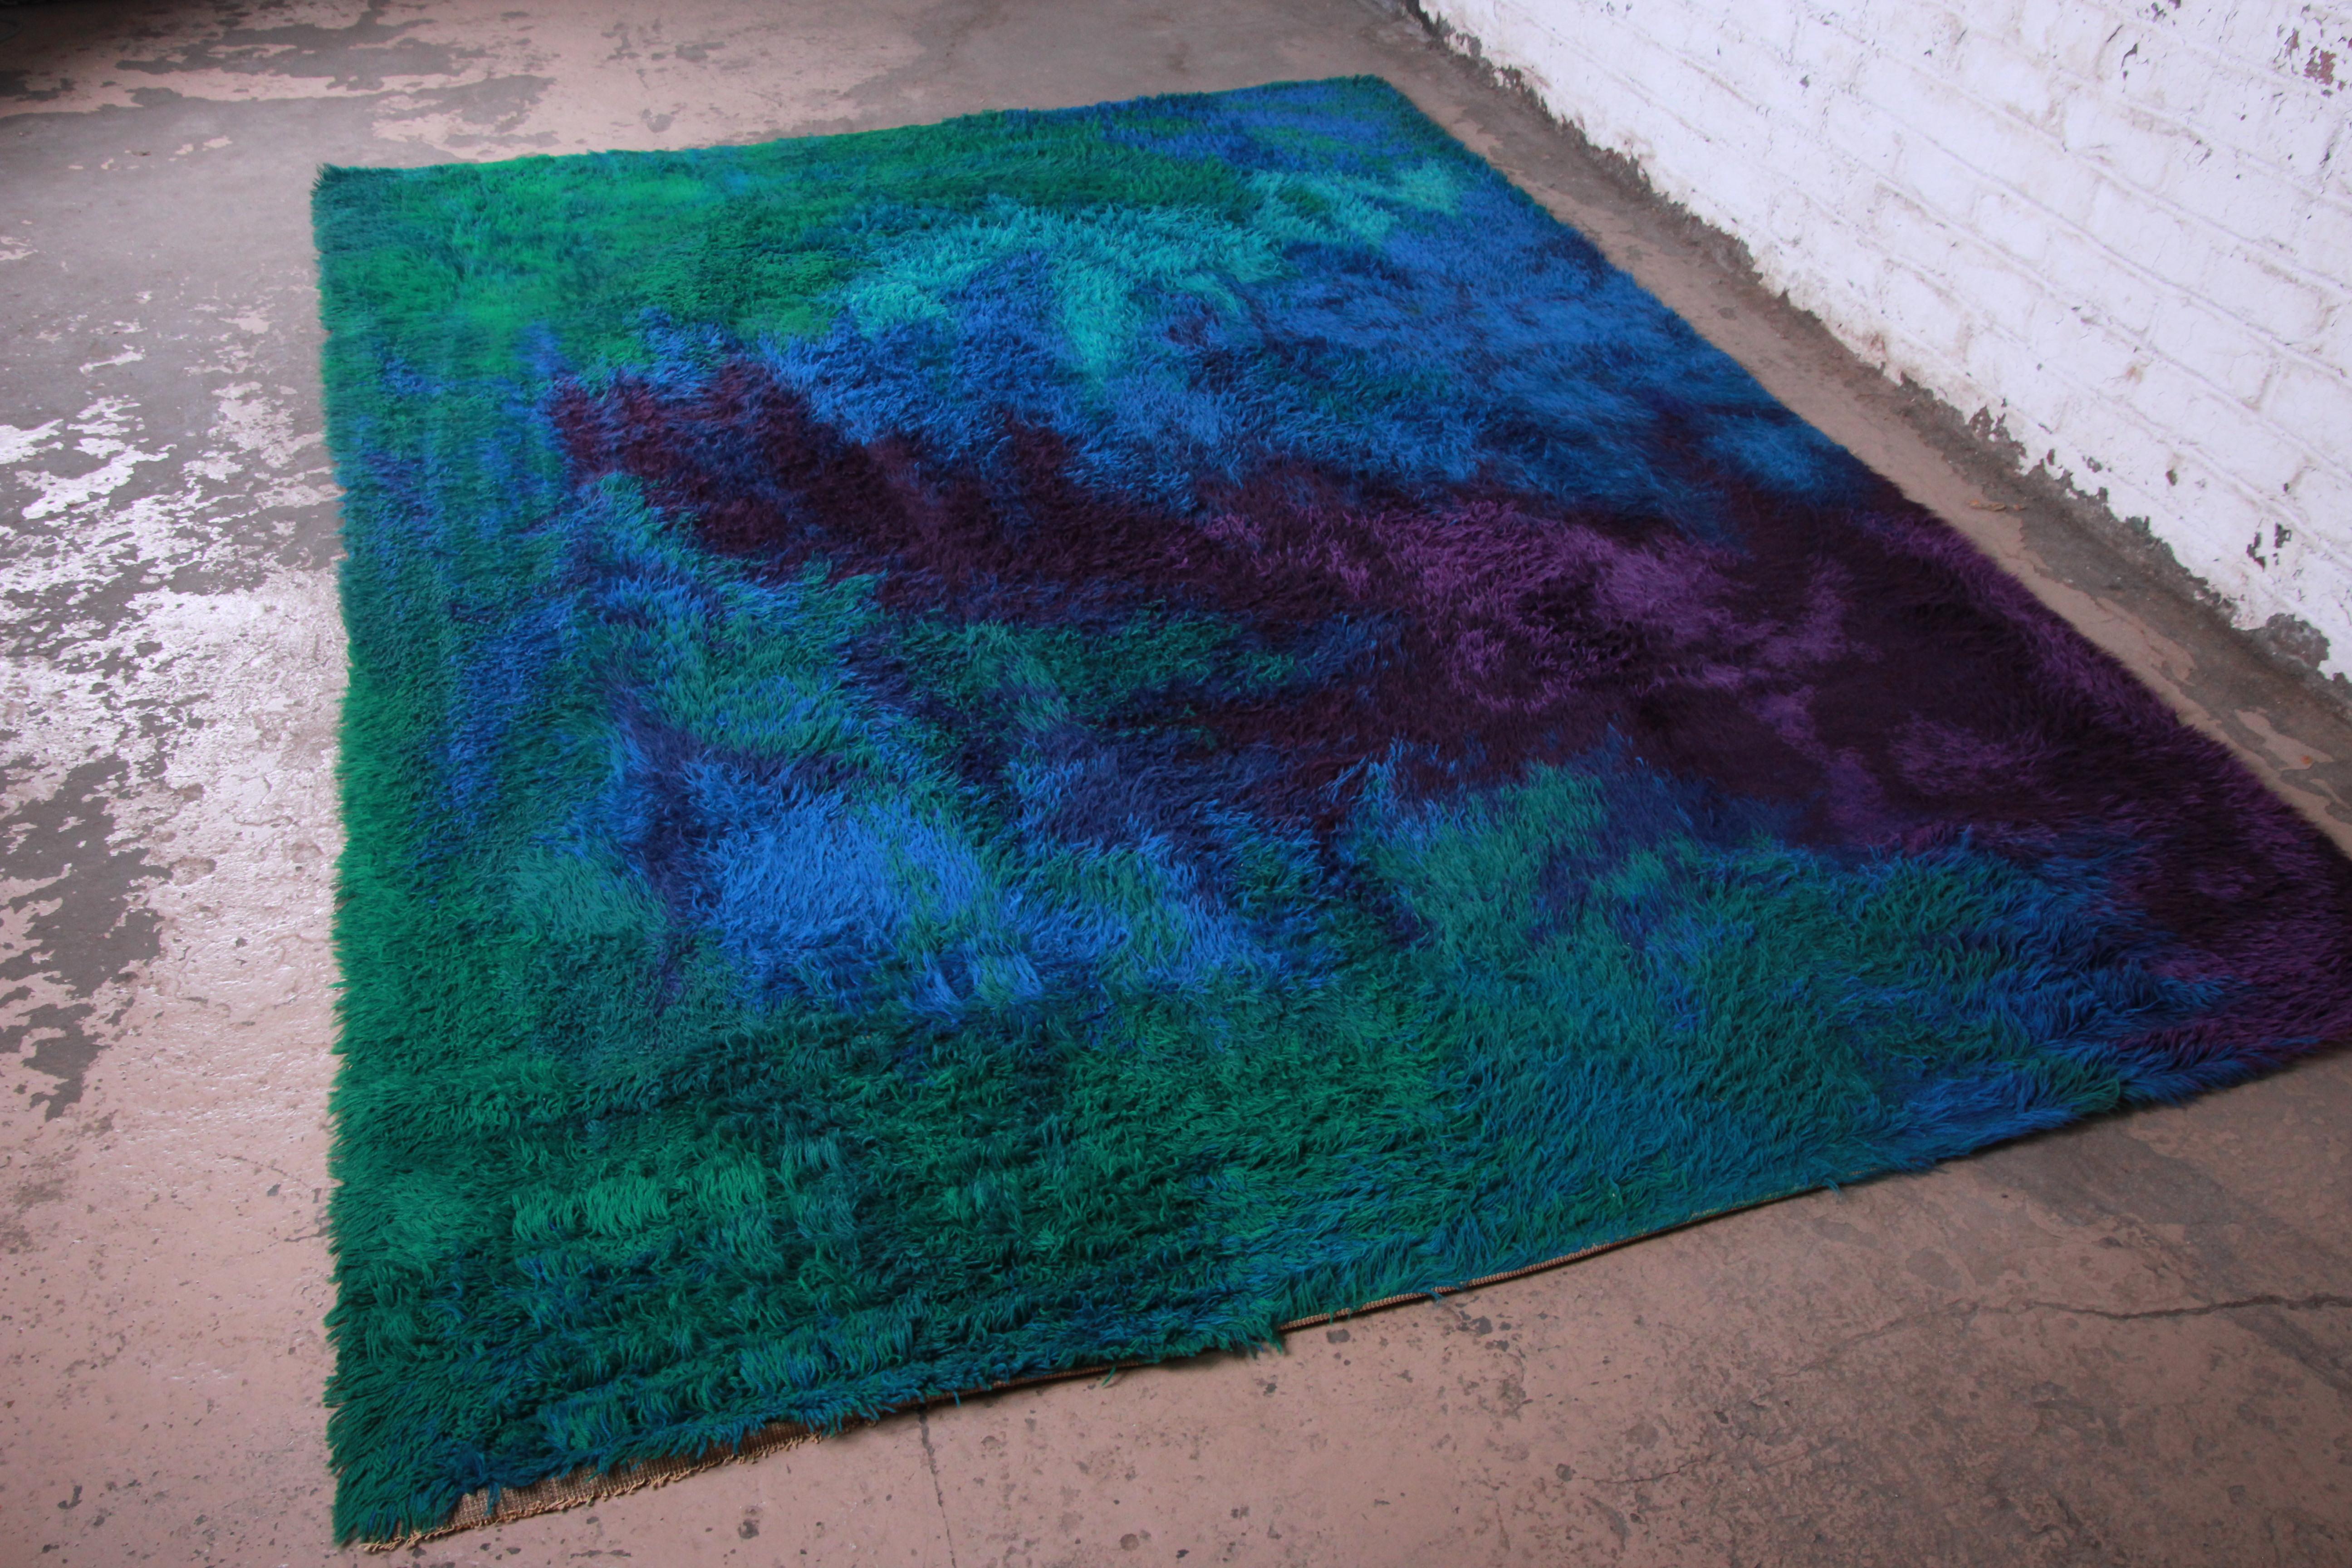 A stunning midcentury Danish Modern rya shag rug. The rug has a unique abstract design in very vivid colors of purple, blue, teal and green. It has a thick, soft wool pile, with just a couple areas of low pile as pictured. A very nice and clean rug